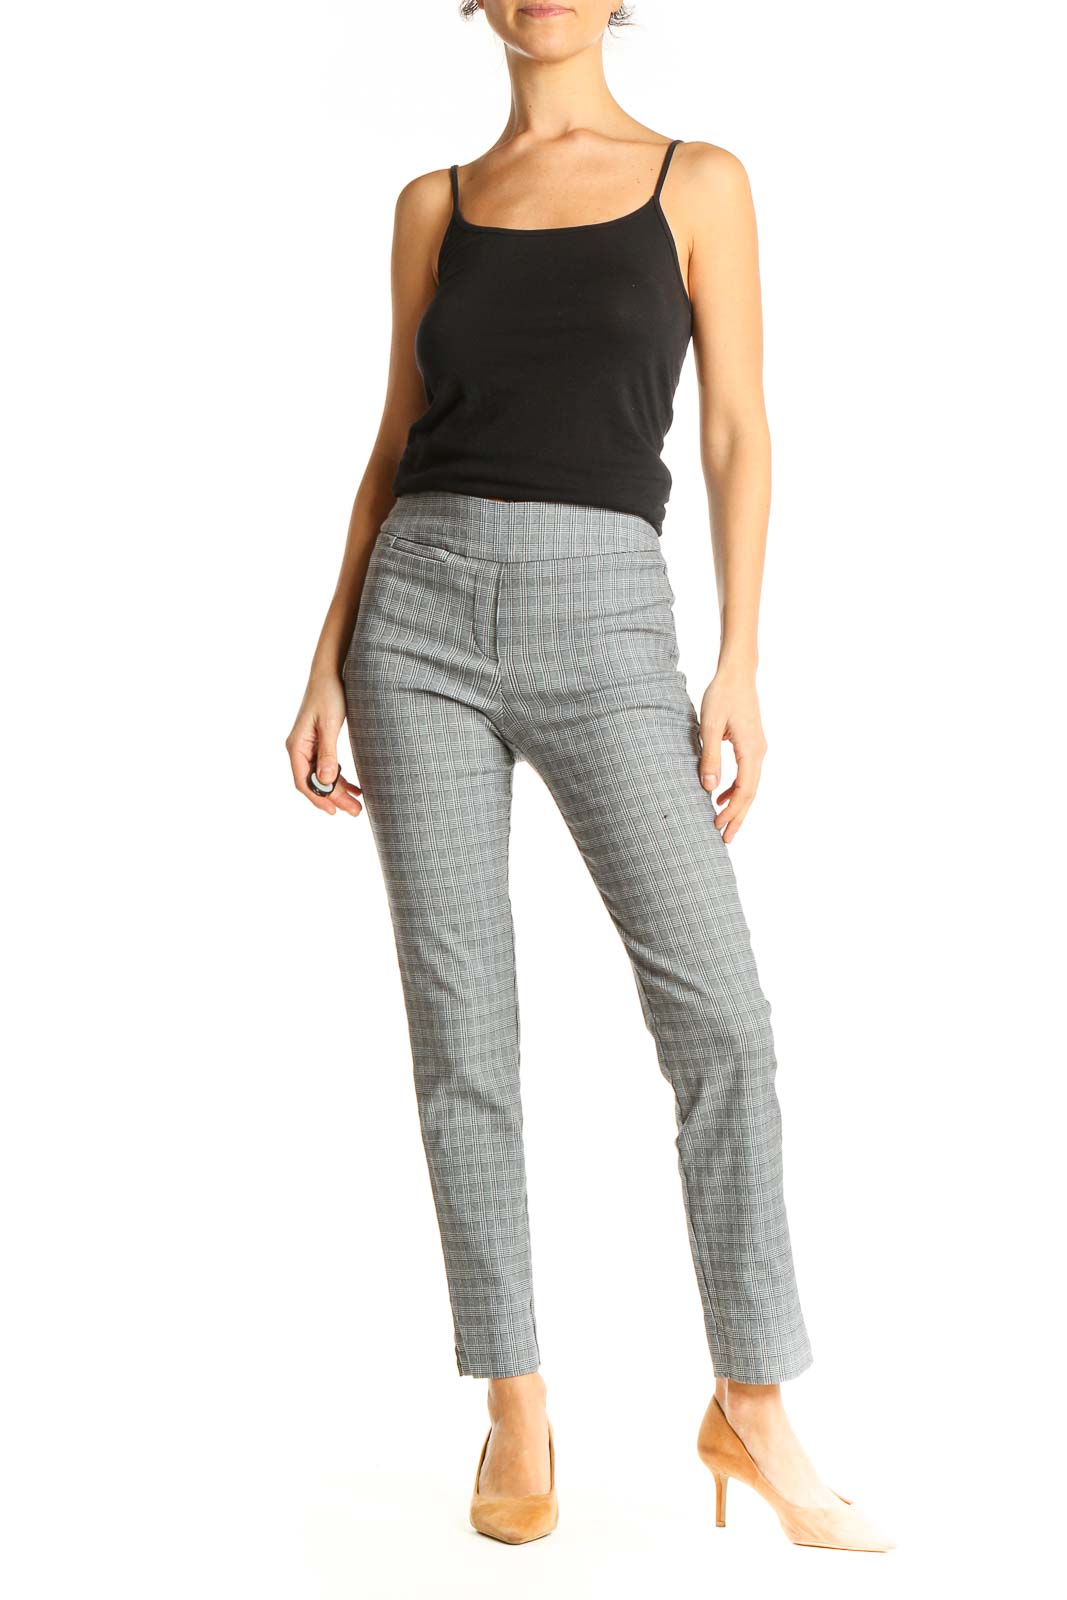 Margaret M Rayon Casual Pants for Women